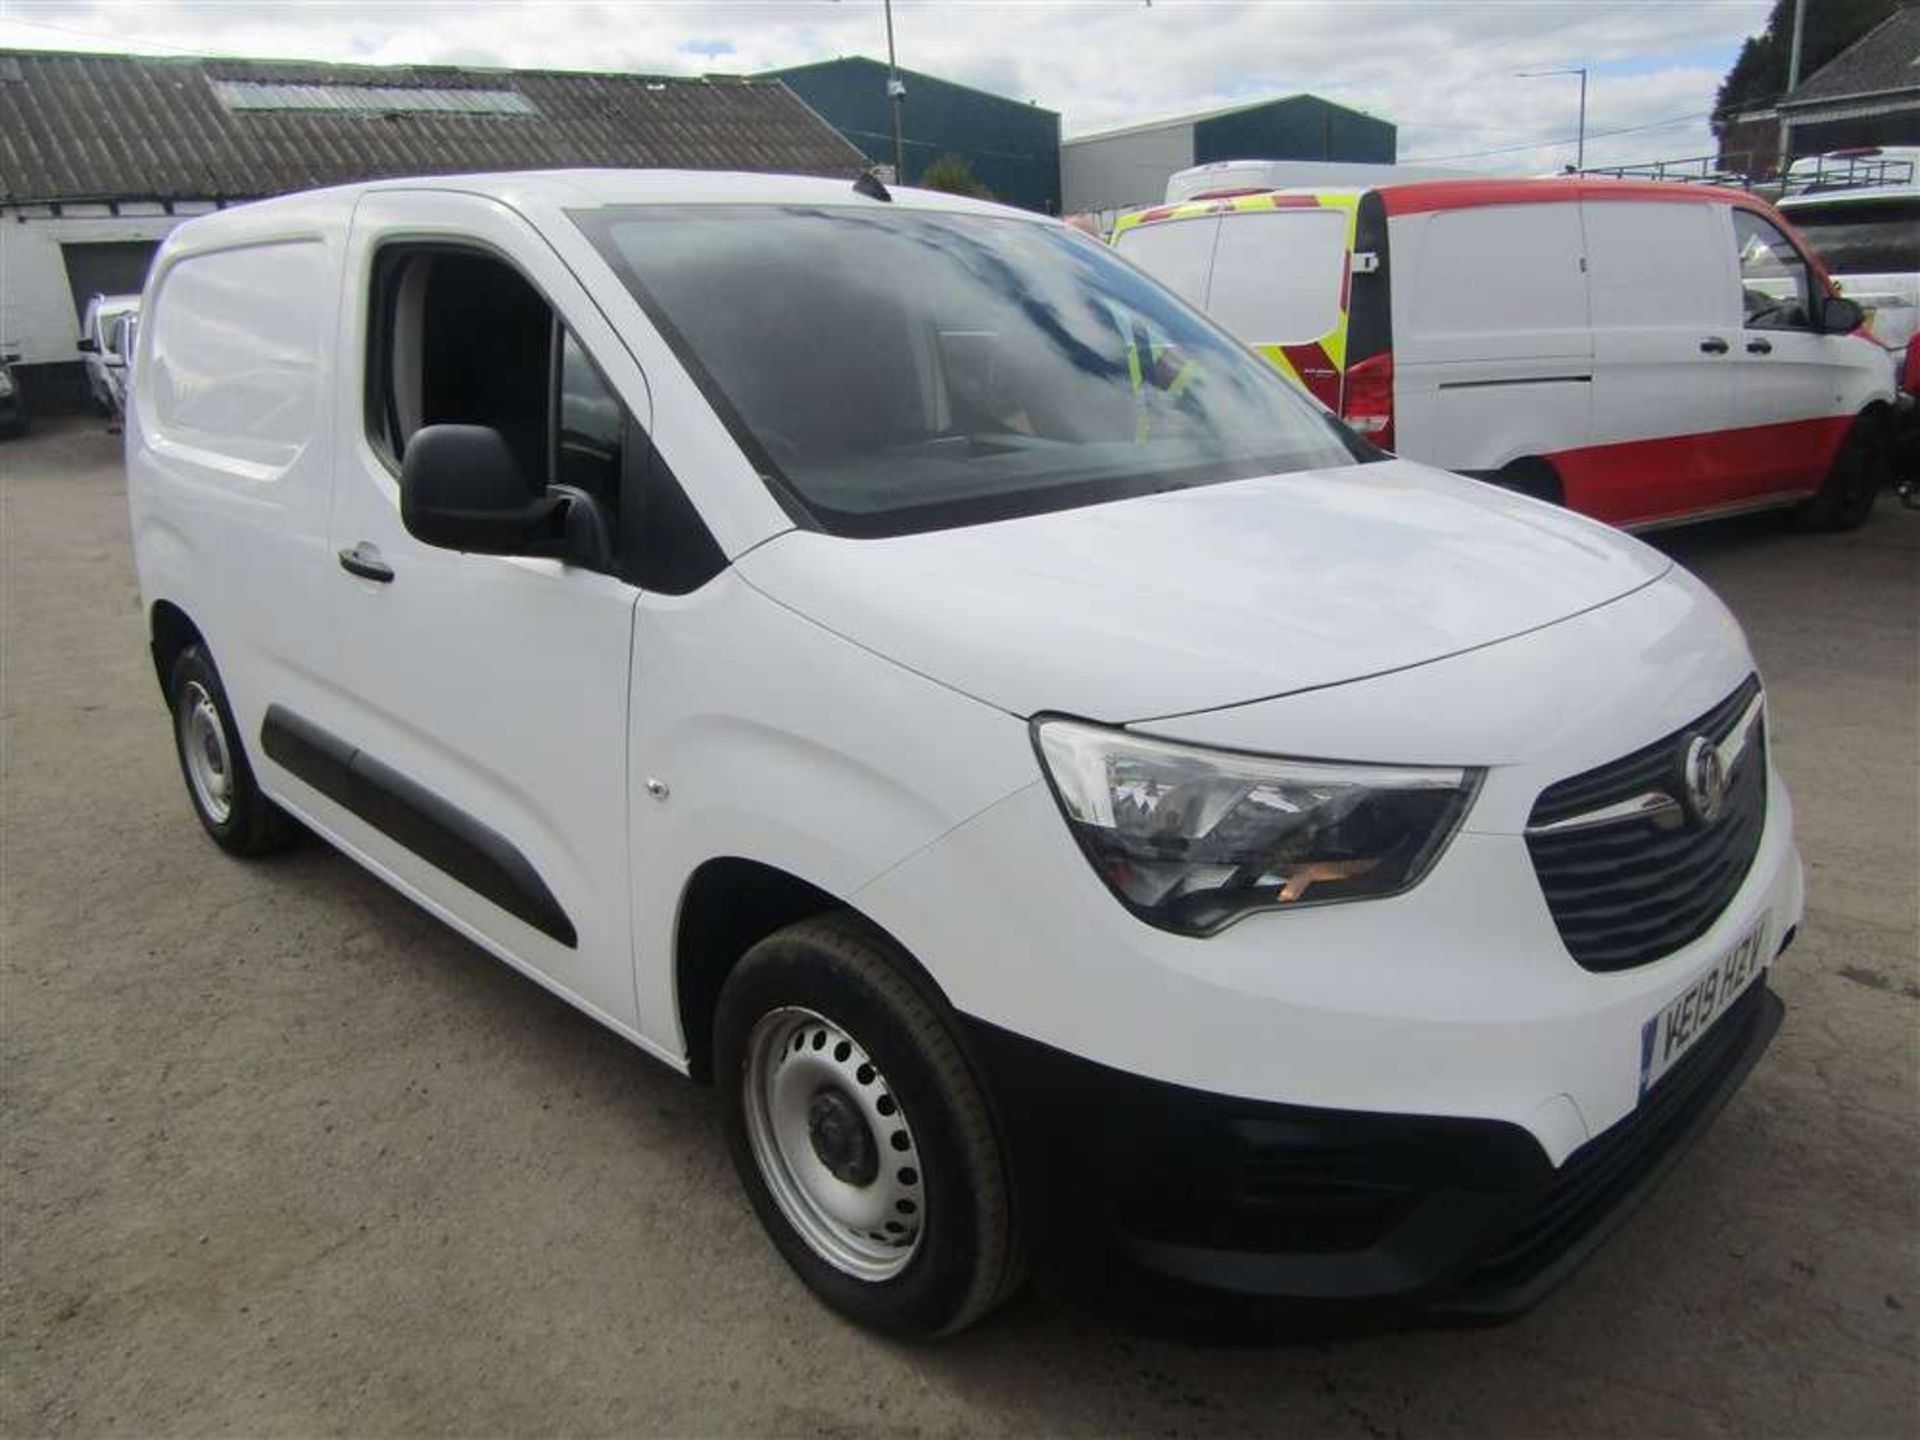 2019 19 reg Vauxhall Combo 2000 Edition T/D S/S - ONLY 36K Miles